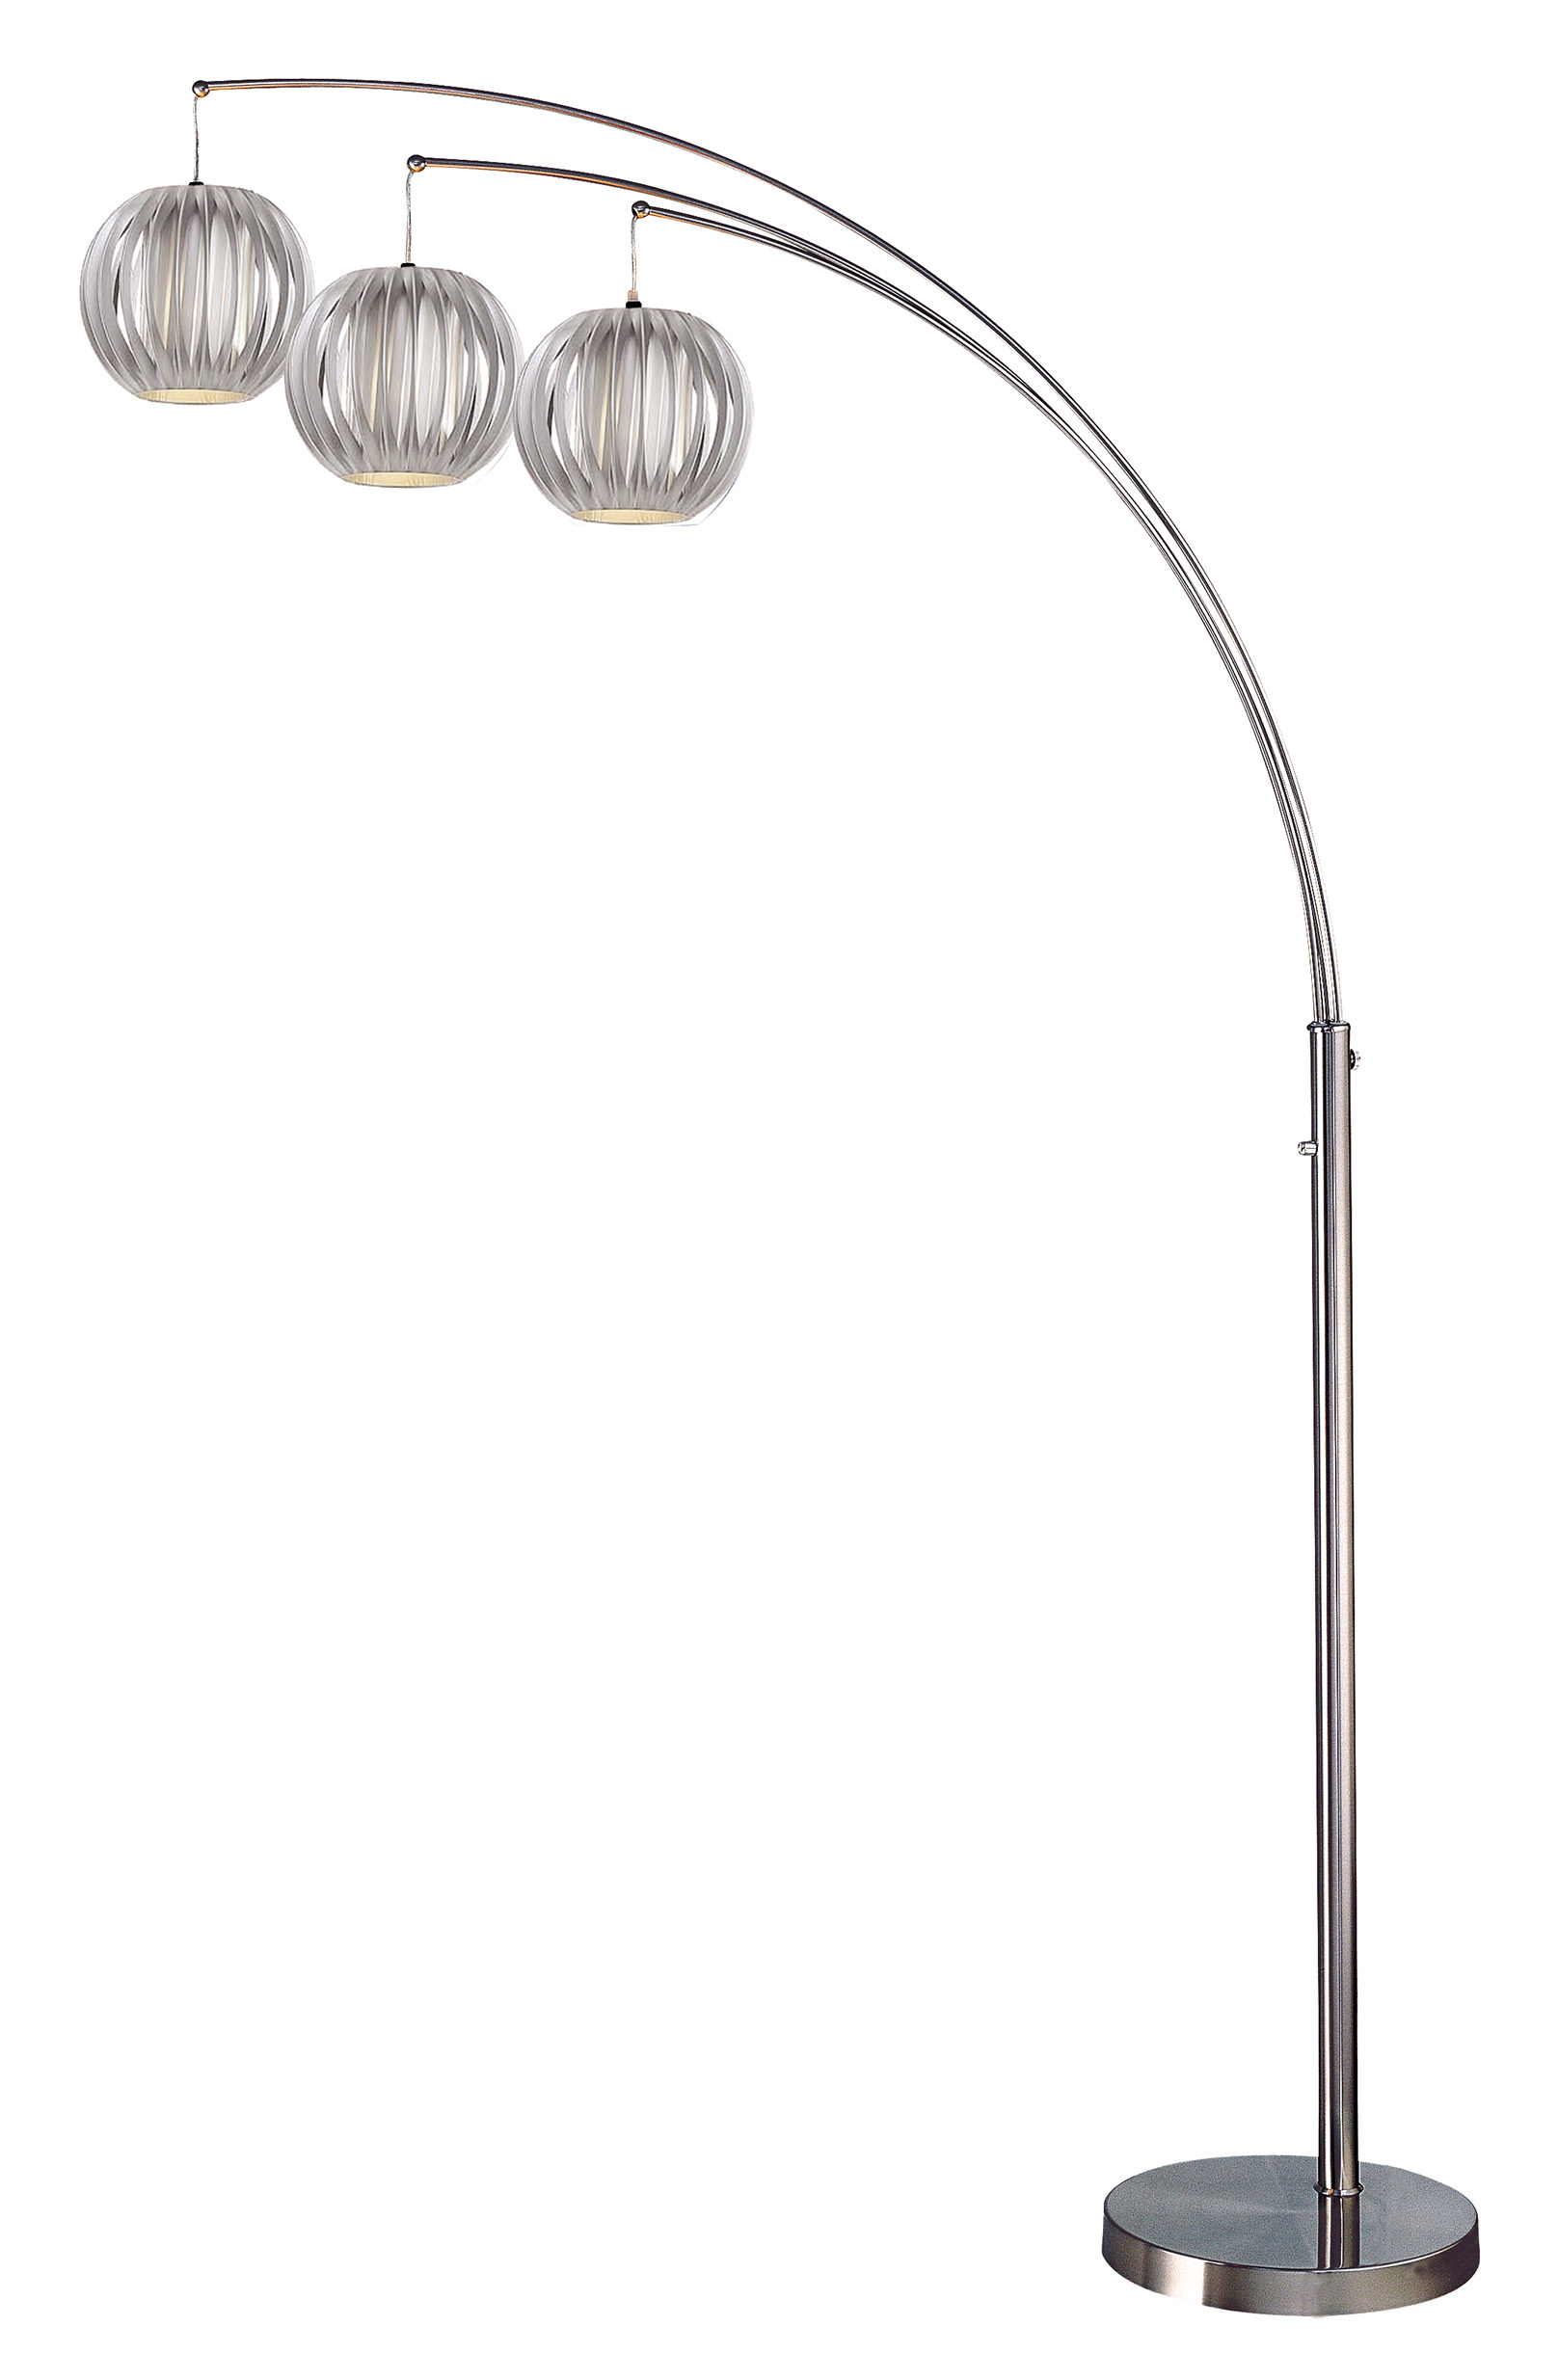 Lite Source-LS-8871PS/GREY-Deion-Three Light Floor Lamp-44 Inches Wide by 92.5 Inches High   Polished Steel Finish with Gray Shade